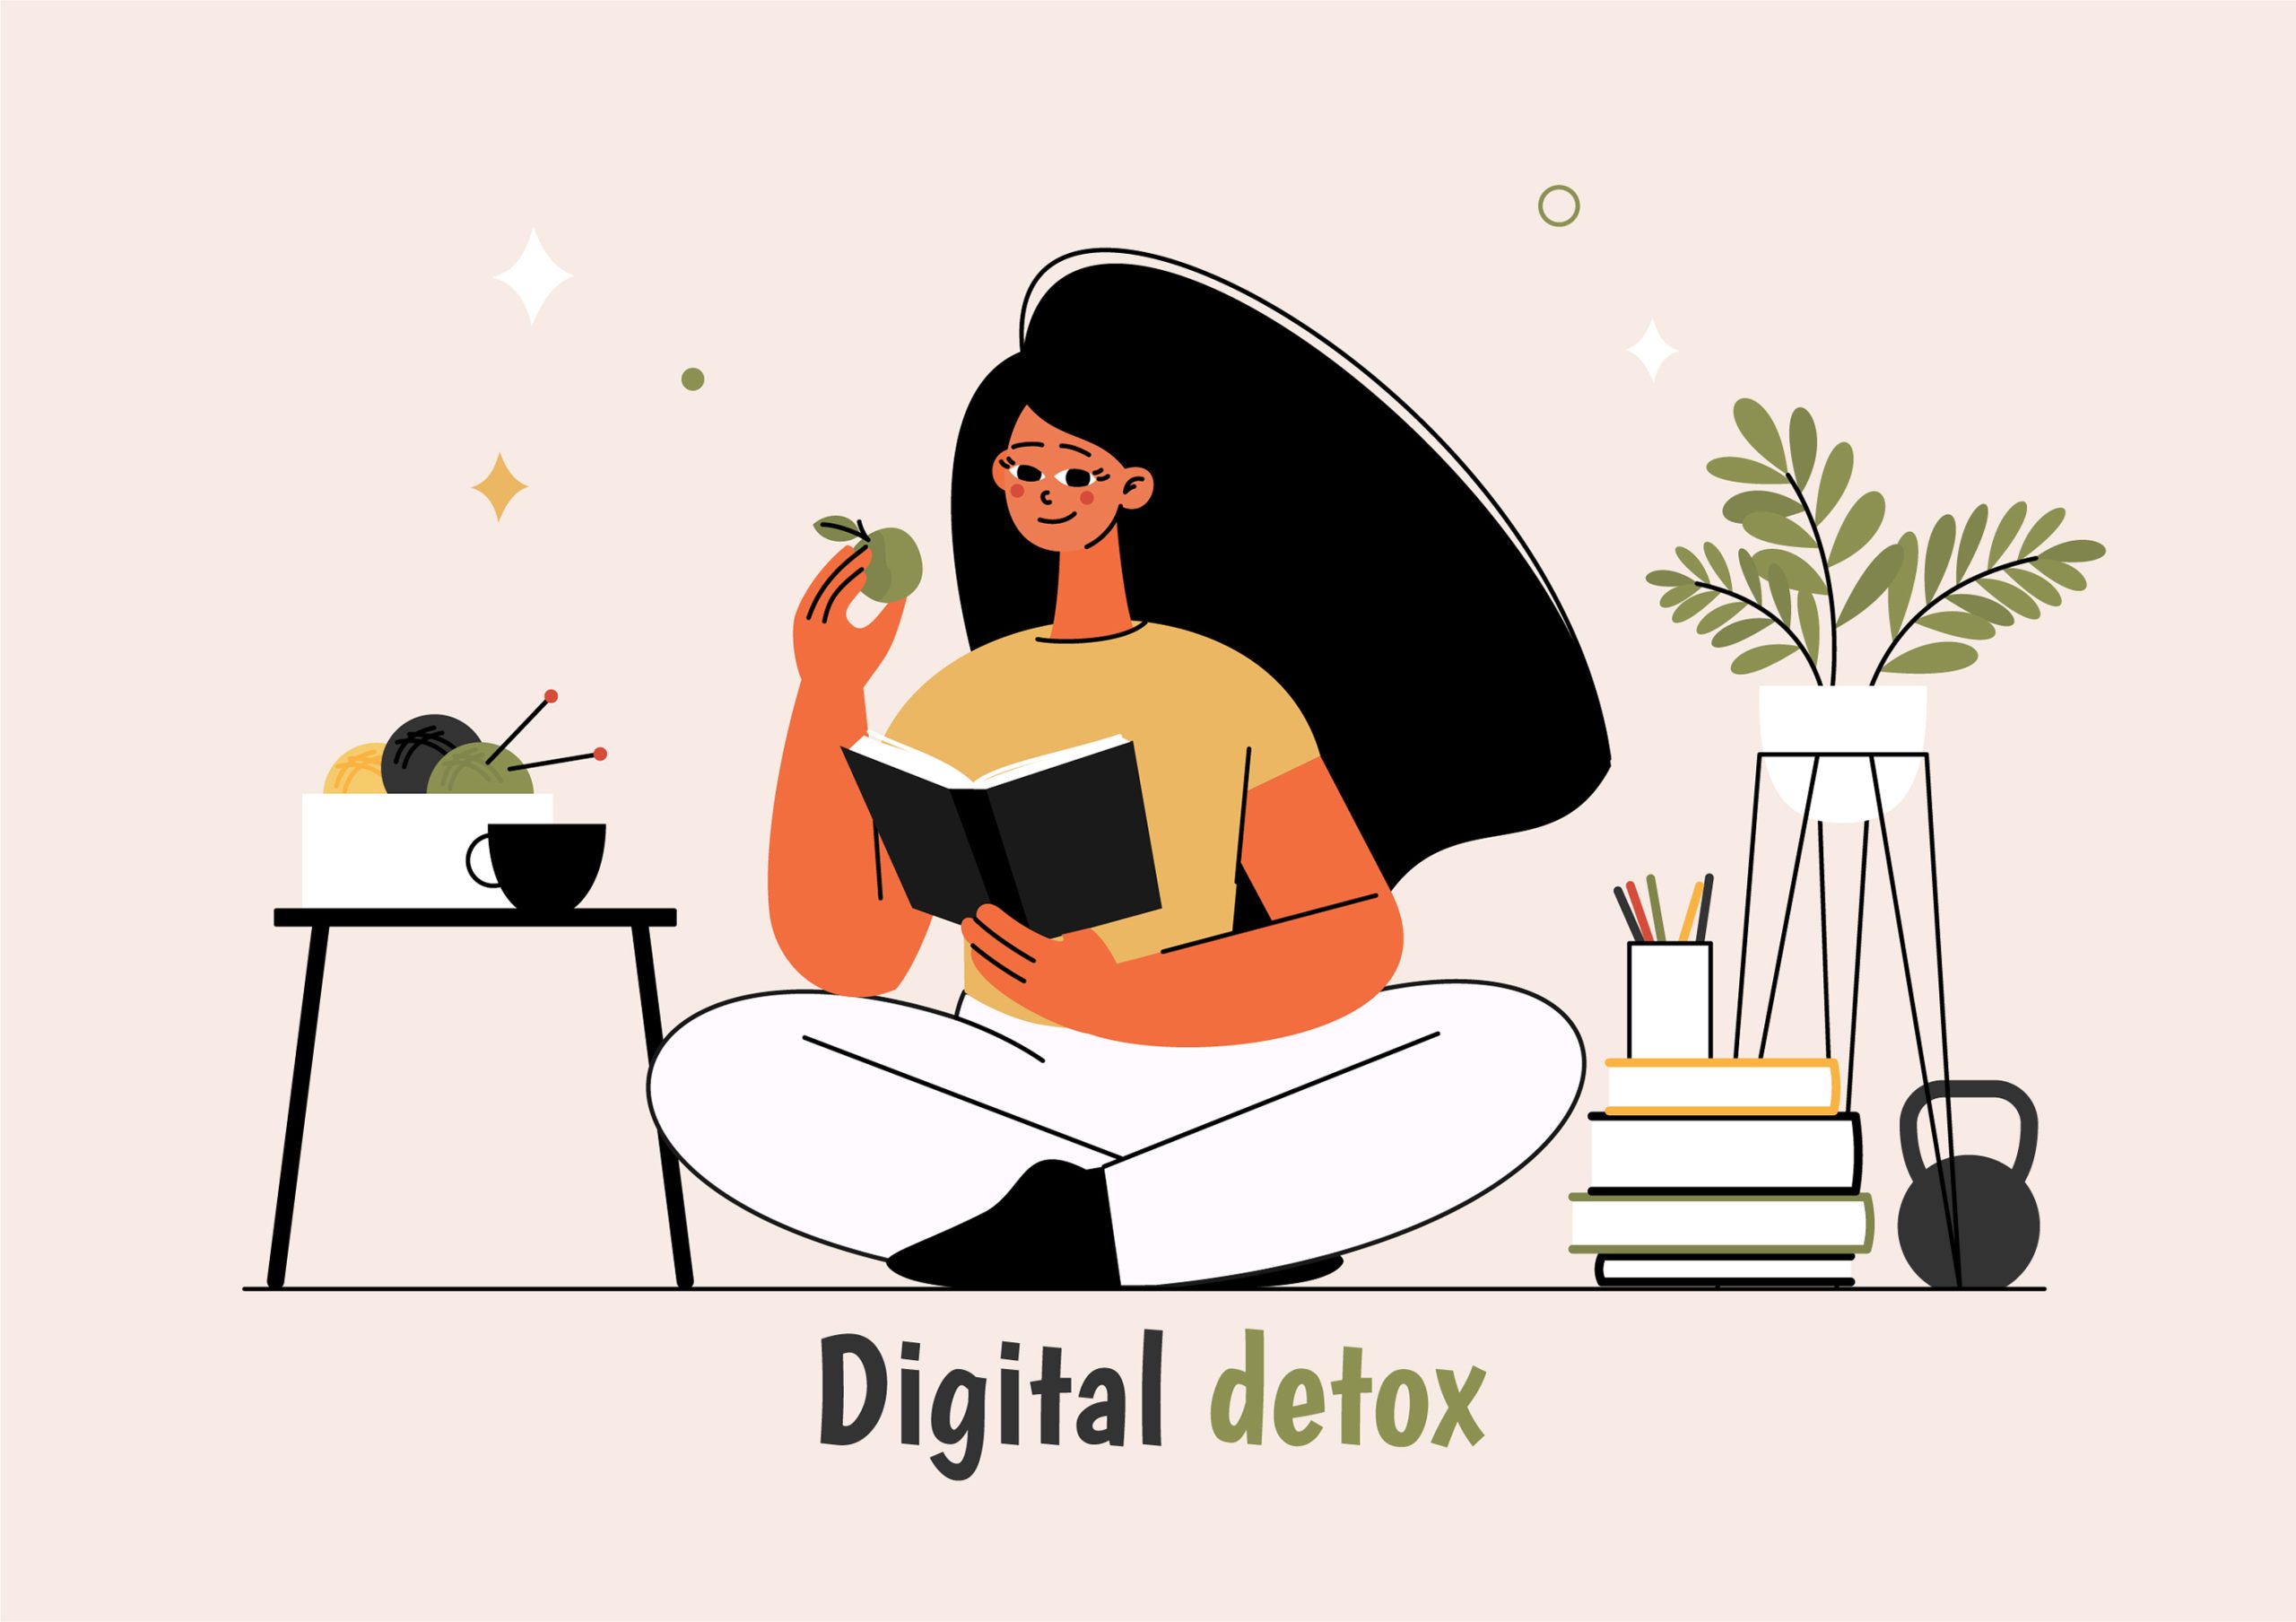 Digital Detox – How to Unplug and Reconnect with Real Life